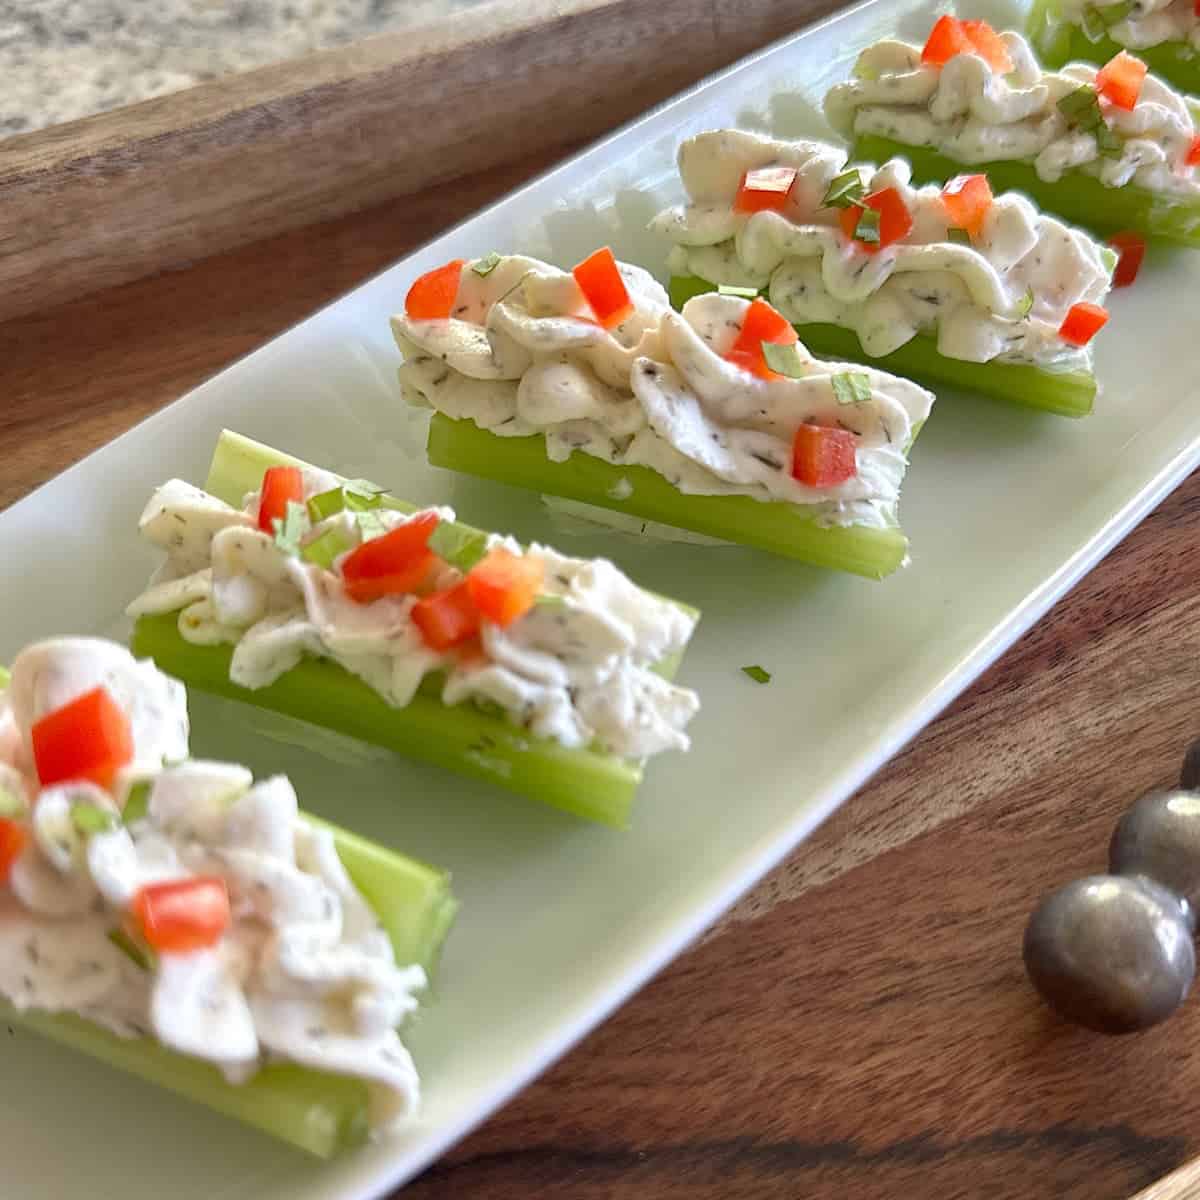 Tray of celery logs filled with dill cream cheese spread.